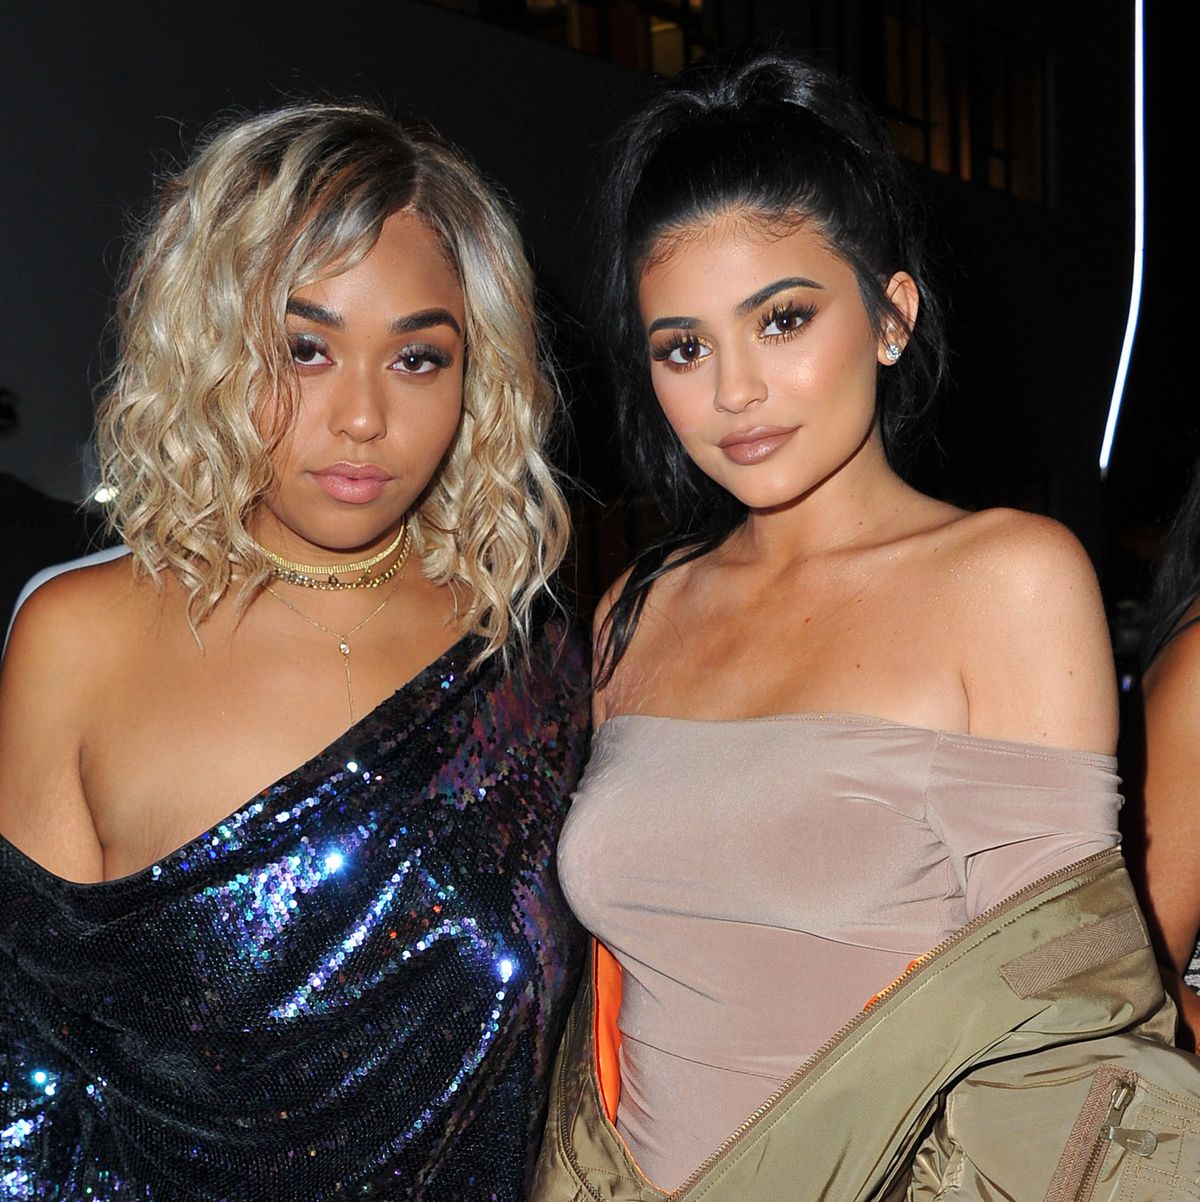 What Has Jordyn Woods Been Up To Since Her Scandal With Tristan Thompson?